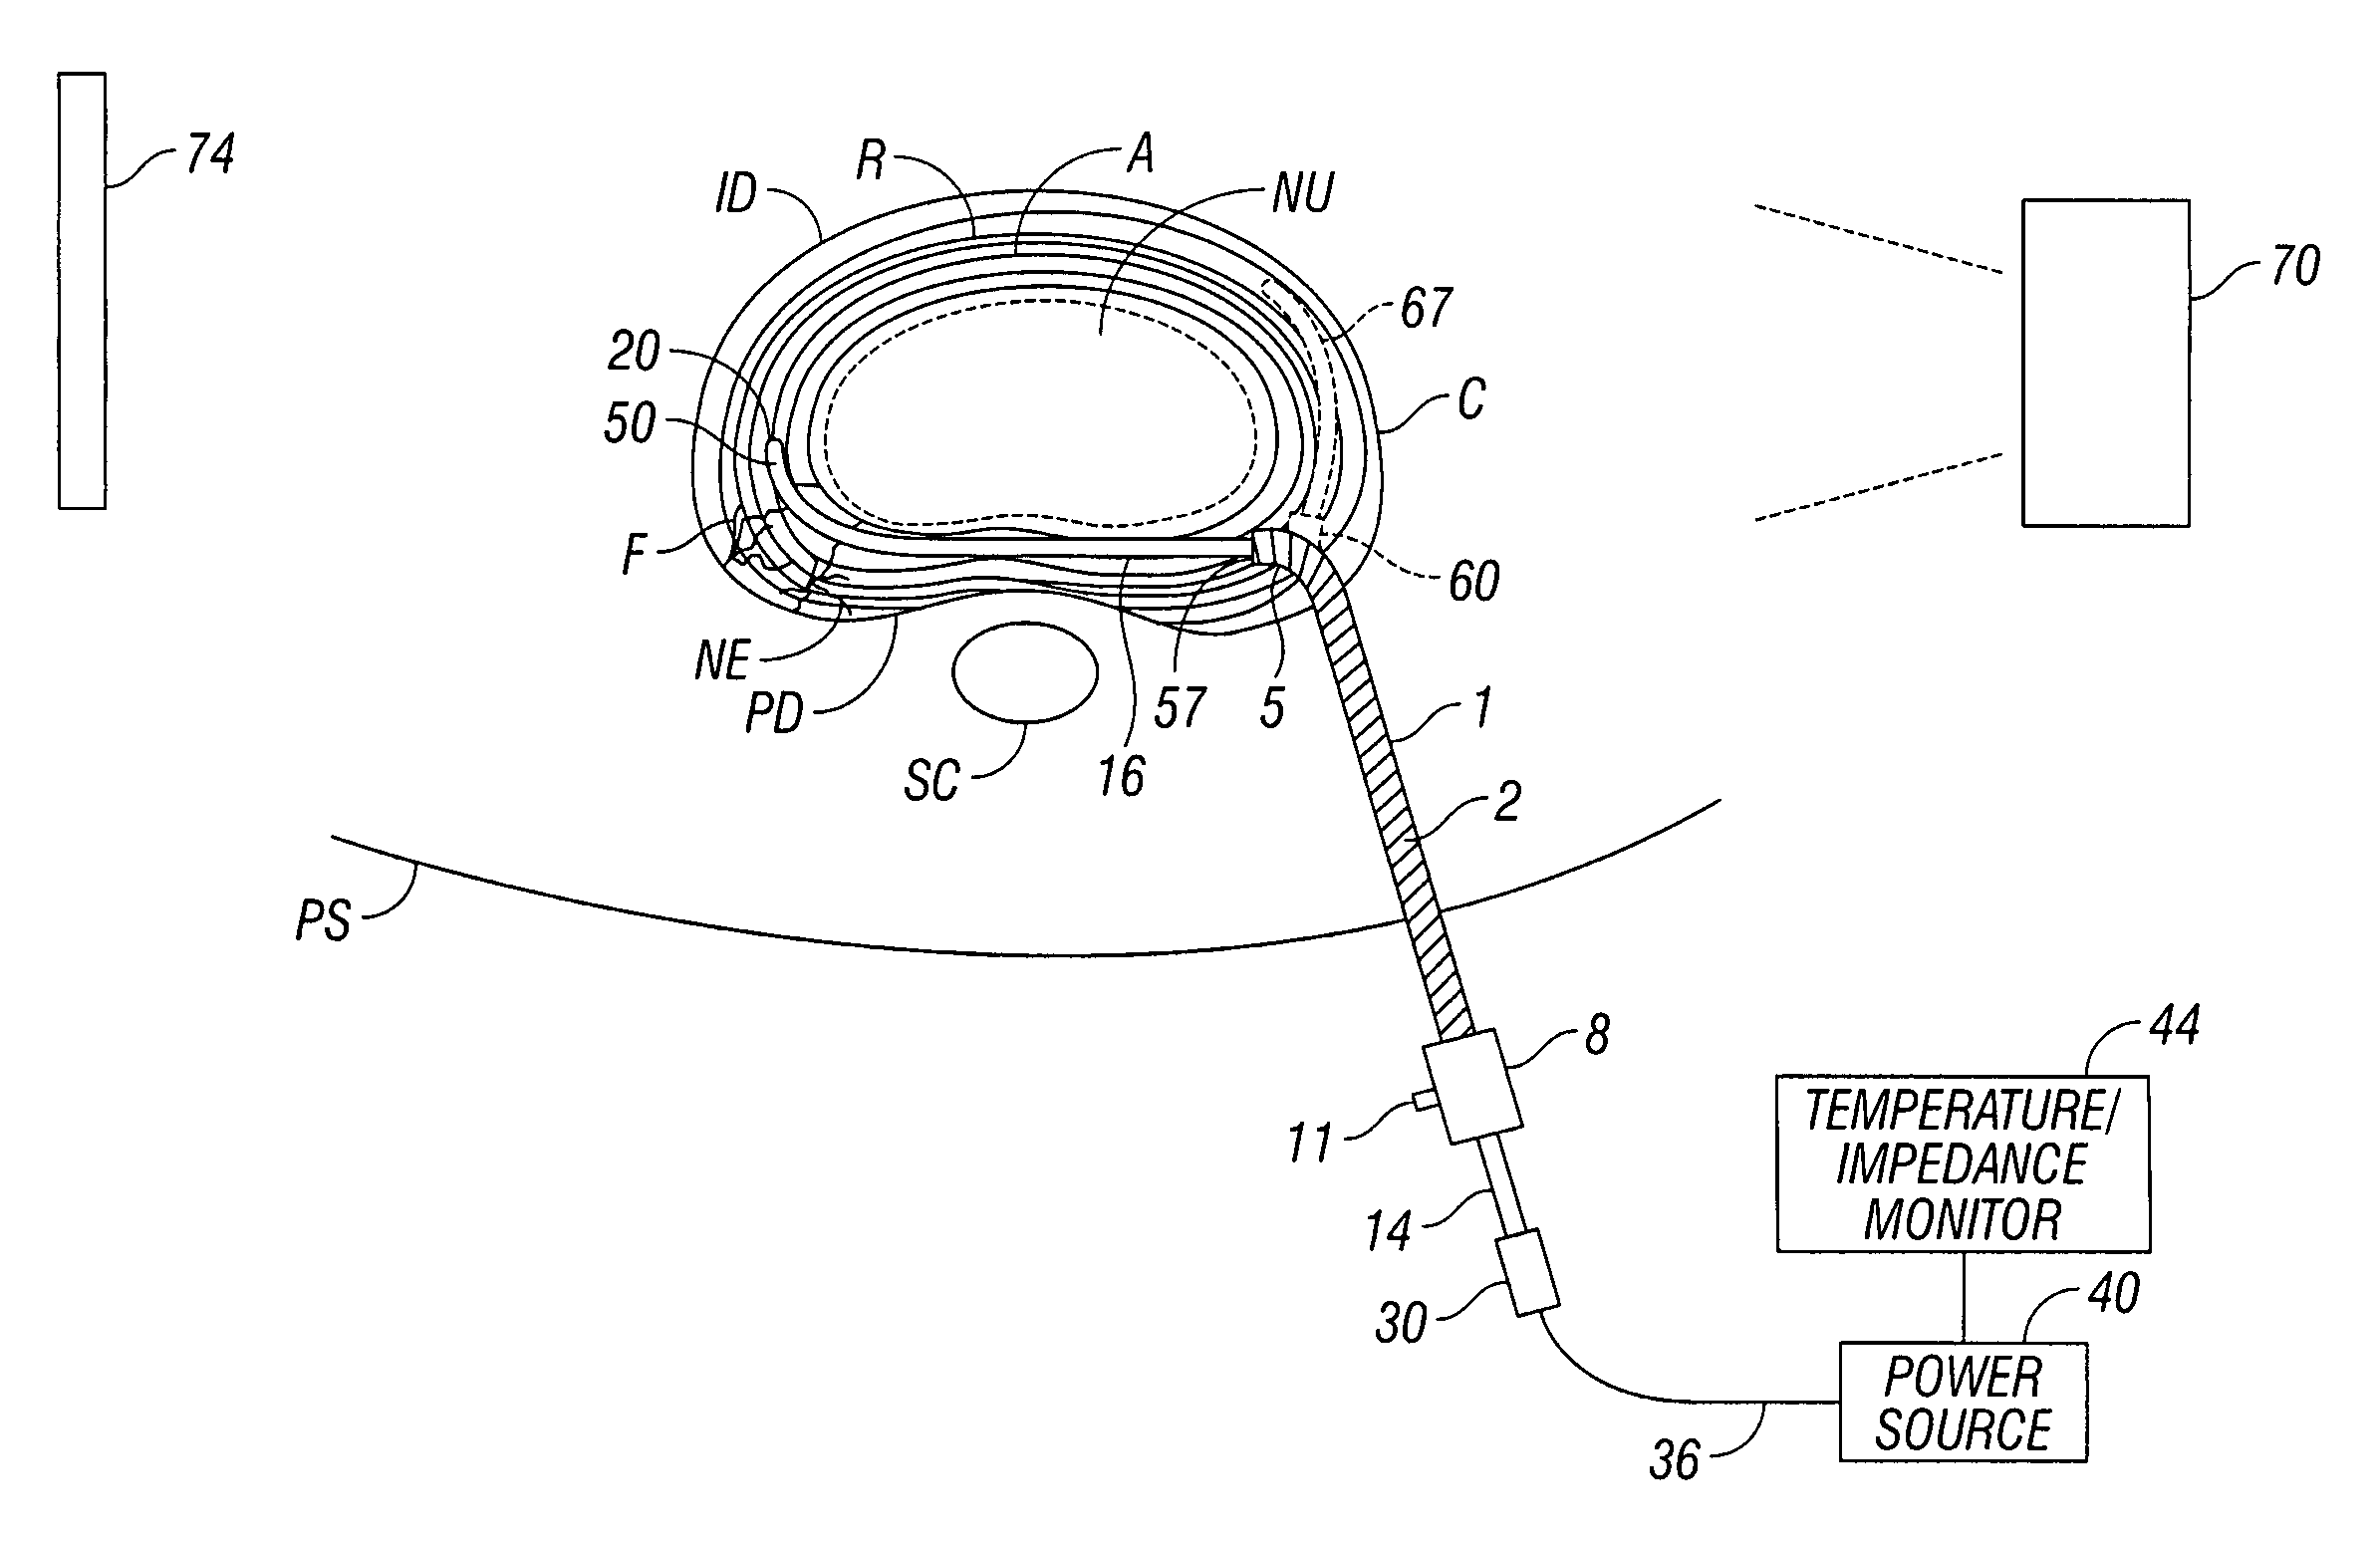 Apparatus for thermal treatment of an intervertebral disc